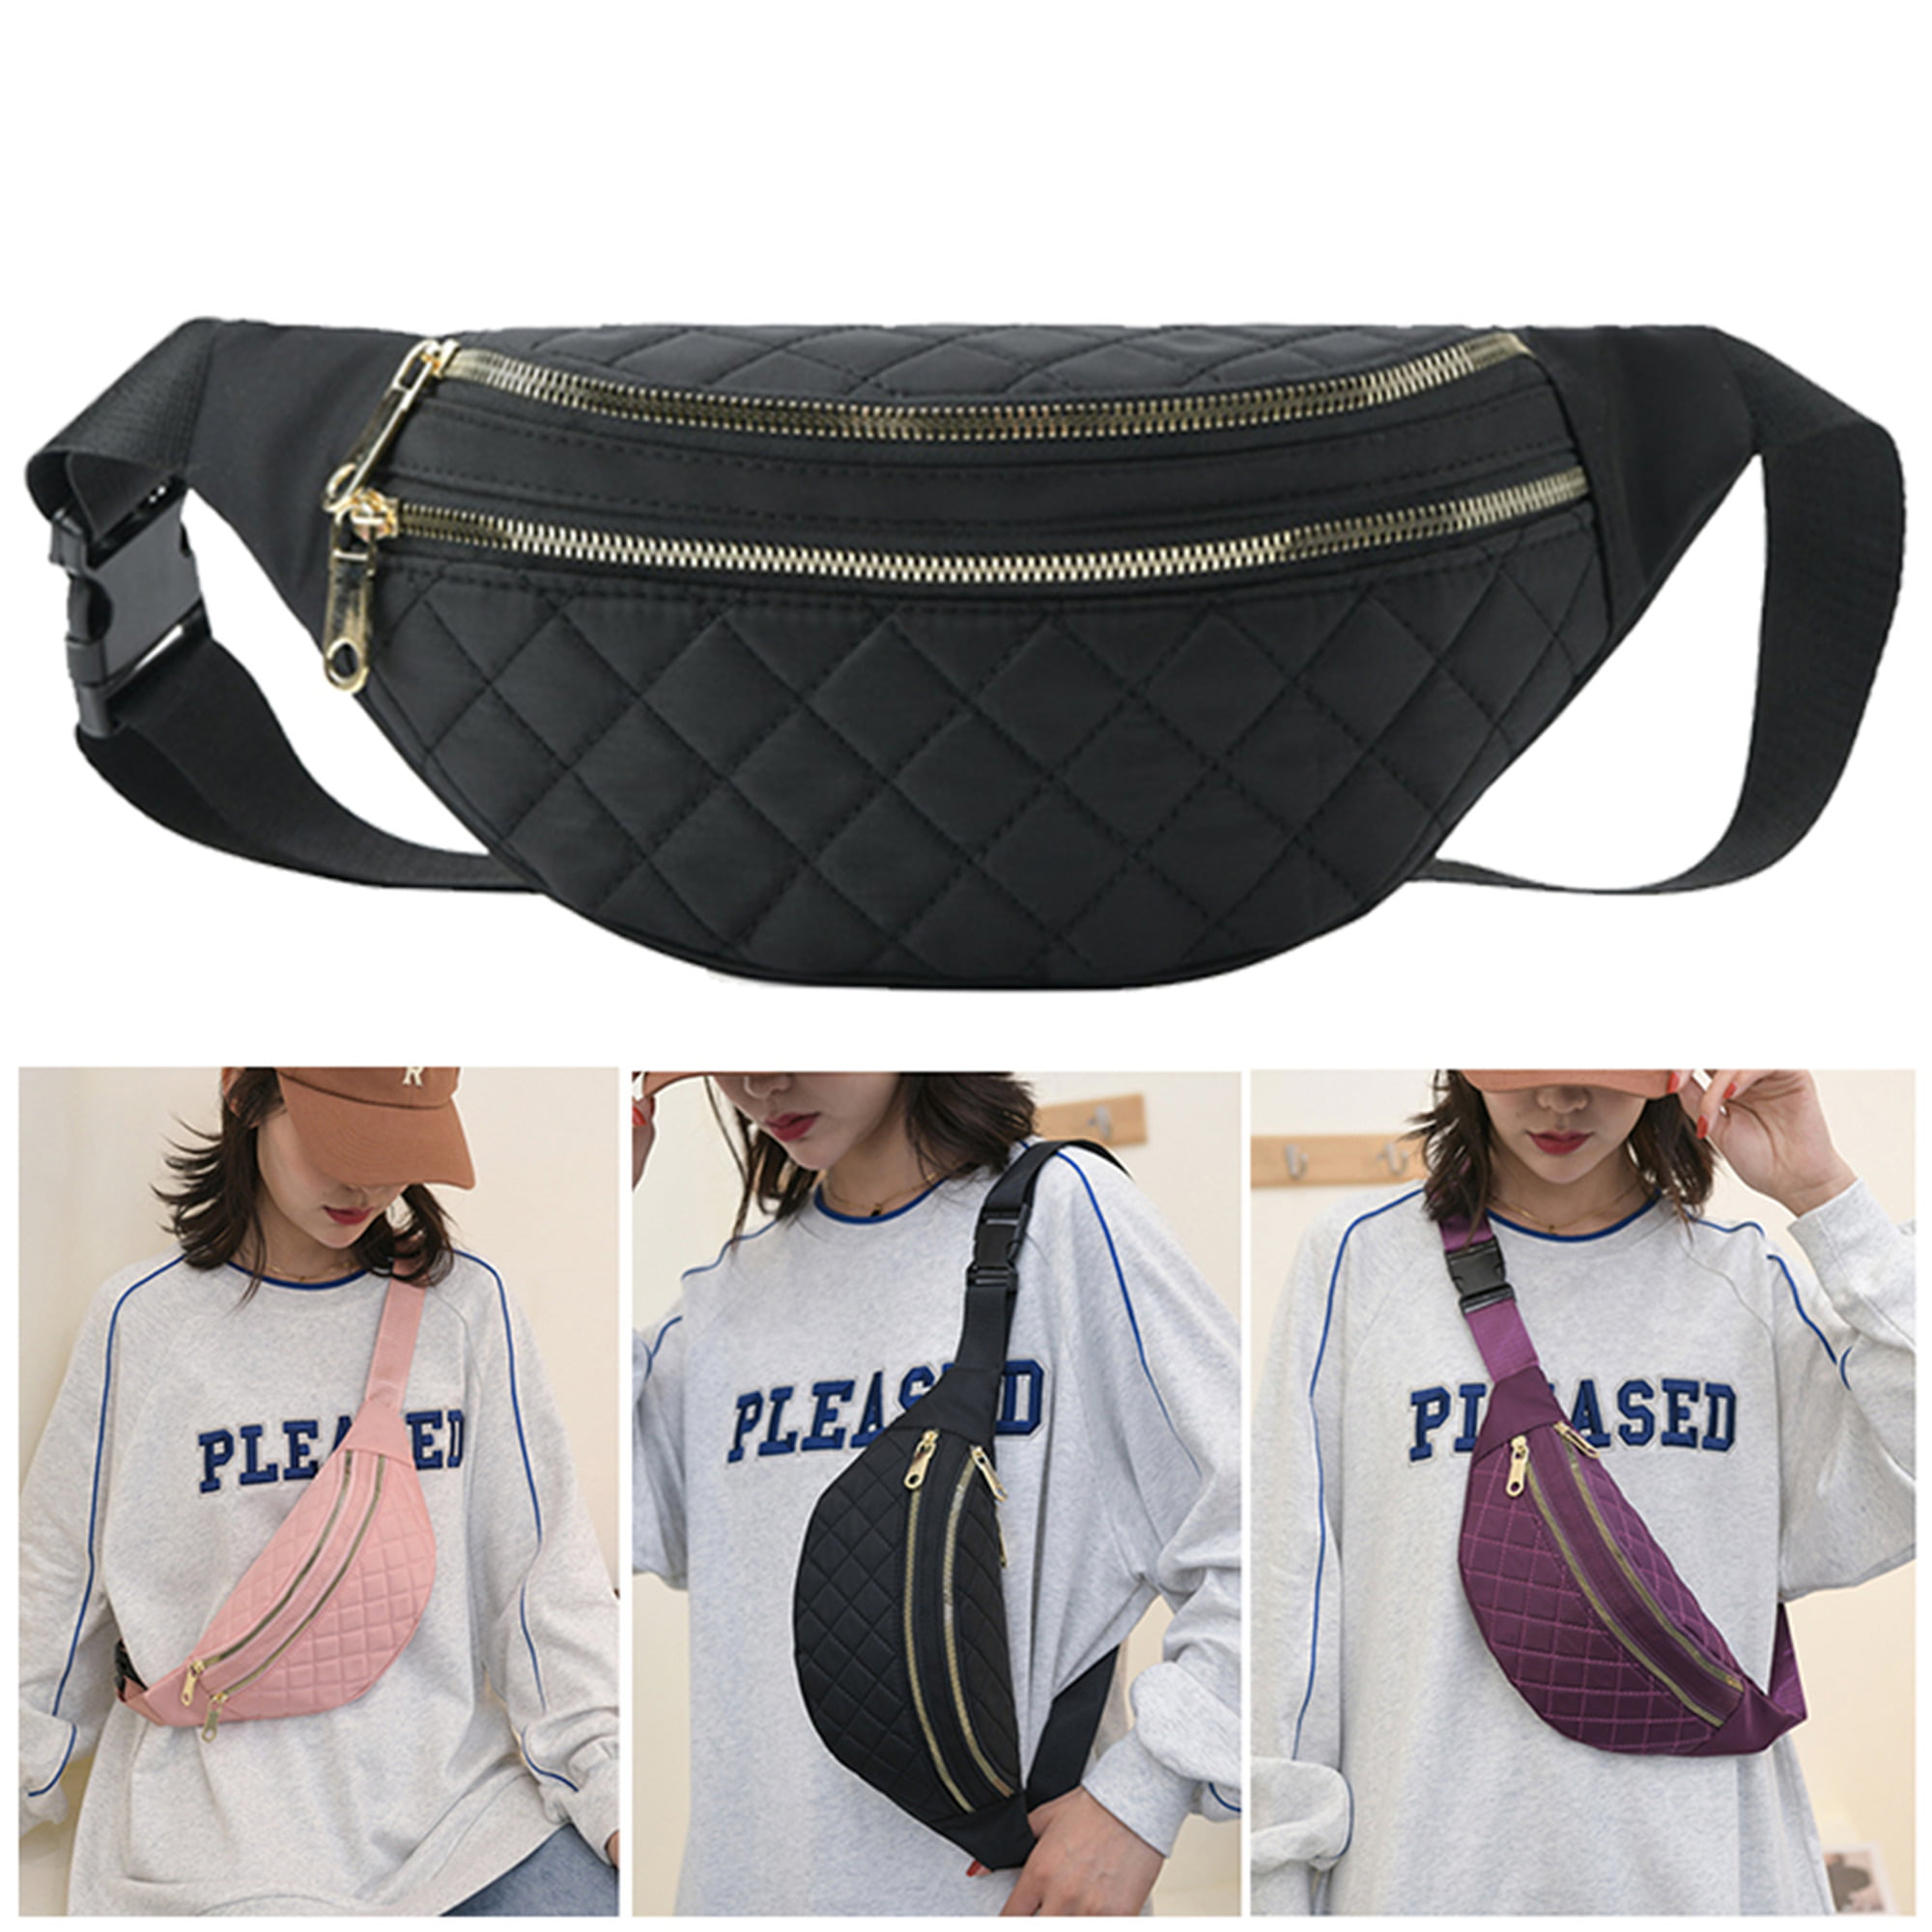 1Pack Fanny Pack Waist Pack for Women,Fashion Belt Bags Gifts for Teen  Girls,Cute Bum Bag for Travel Hiking Cycling Running,Phone Bag Carrying All